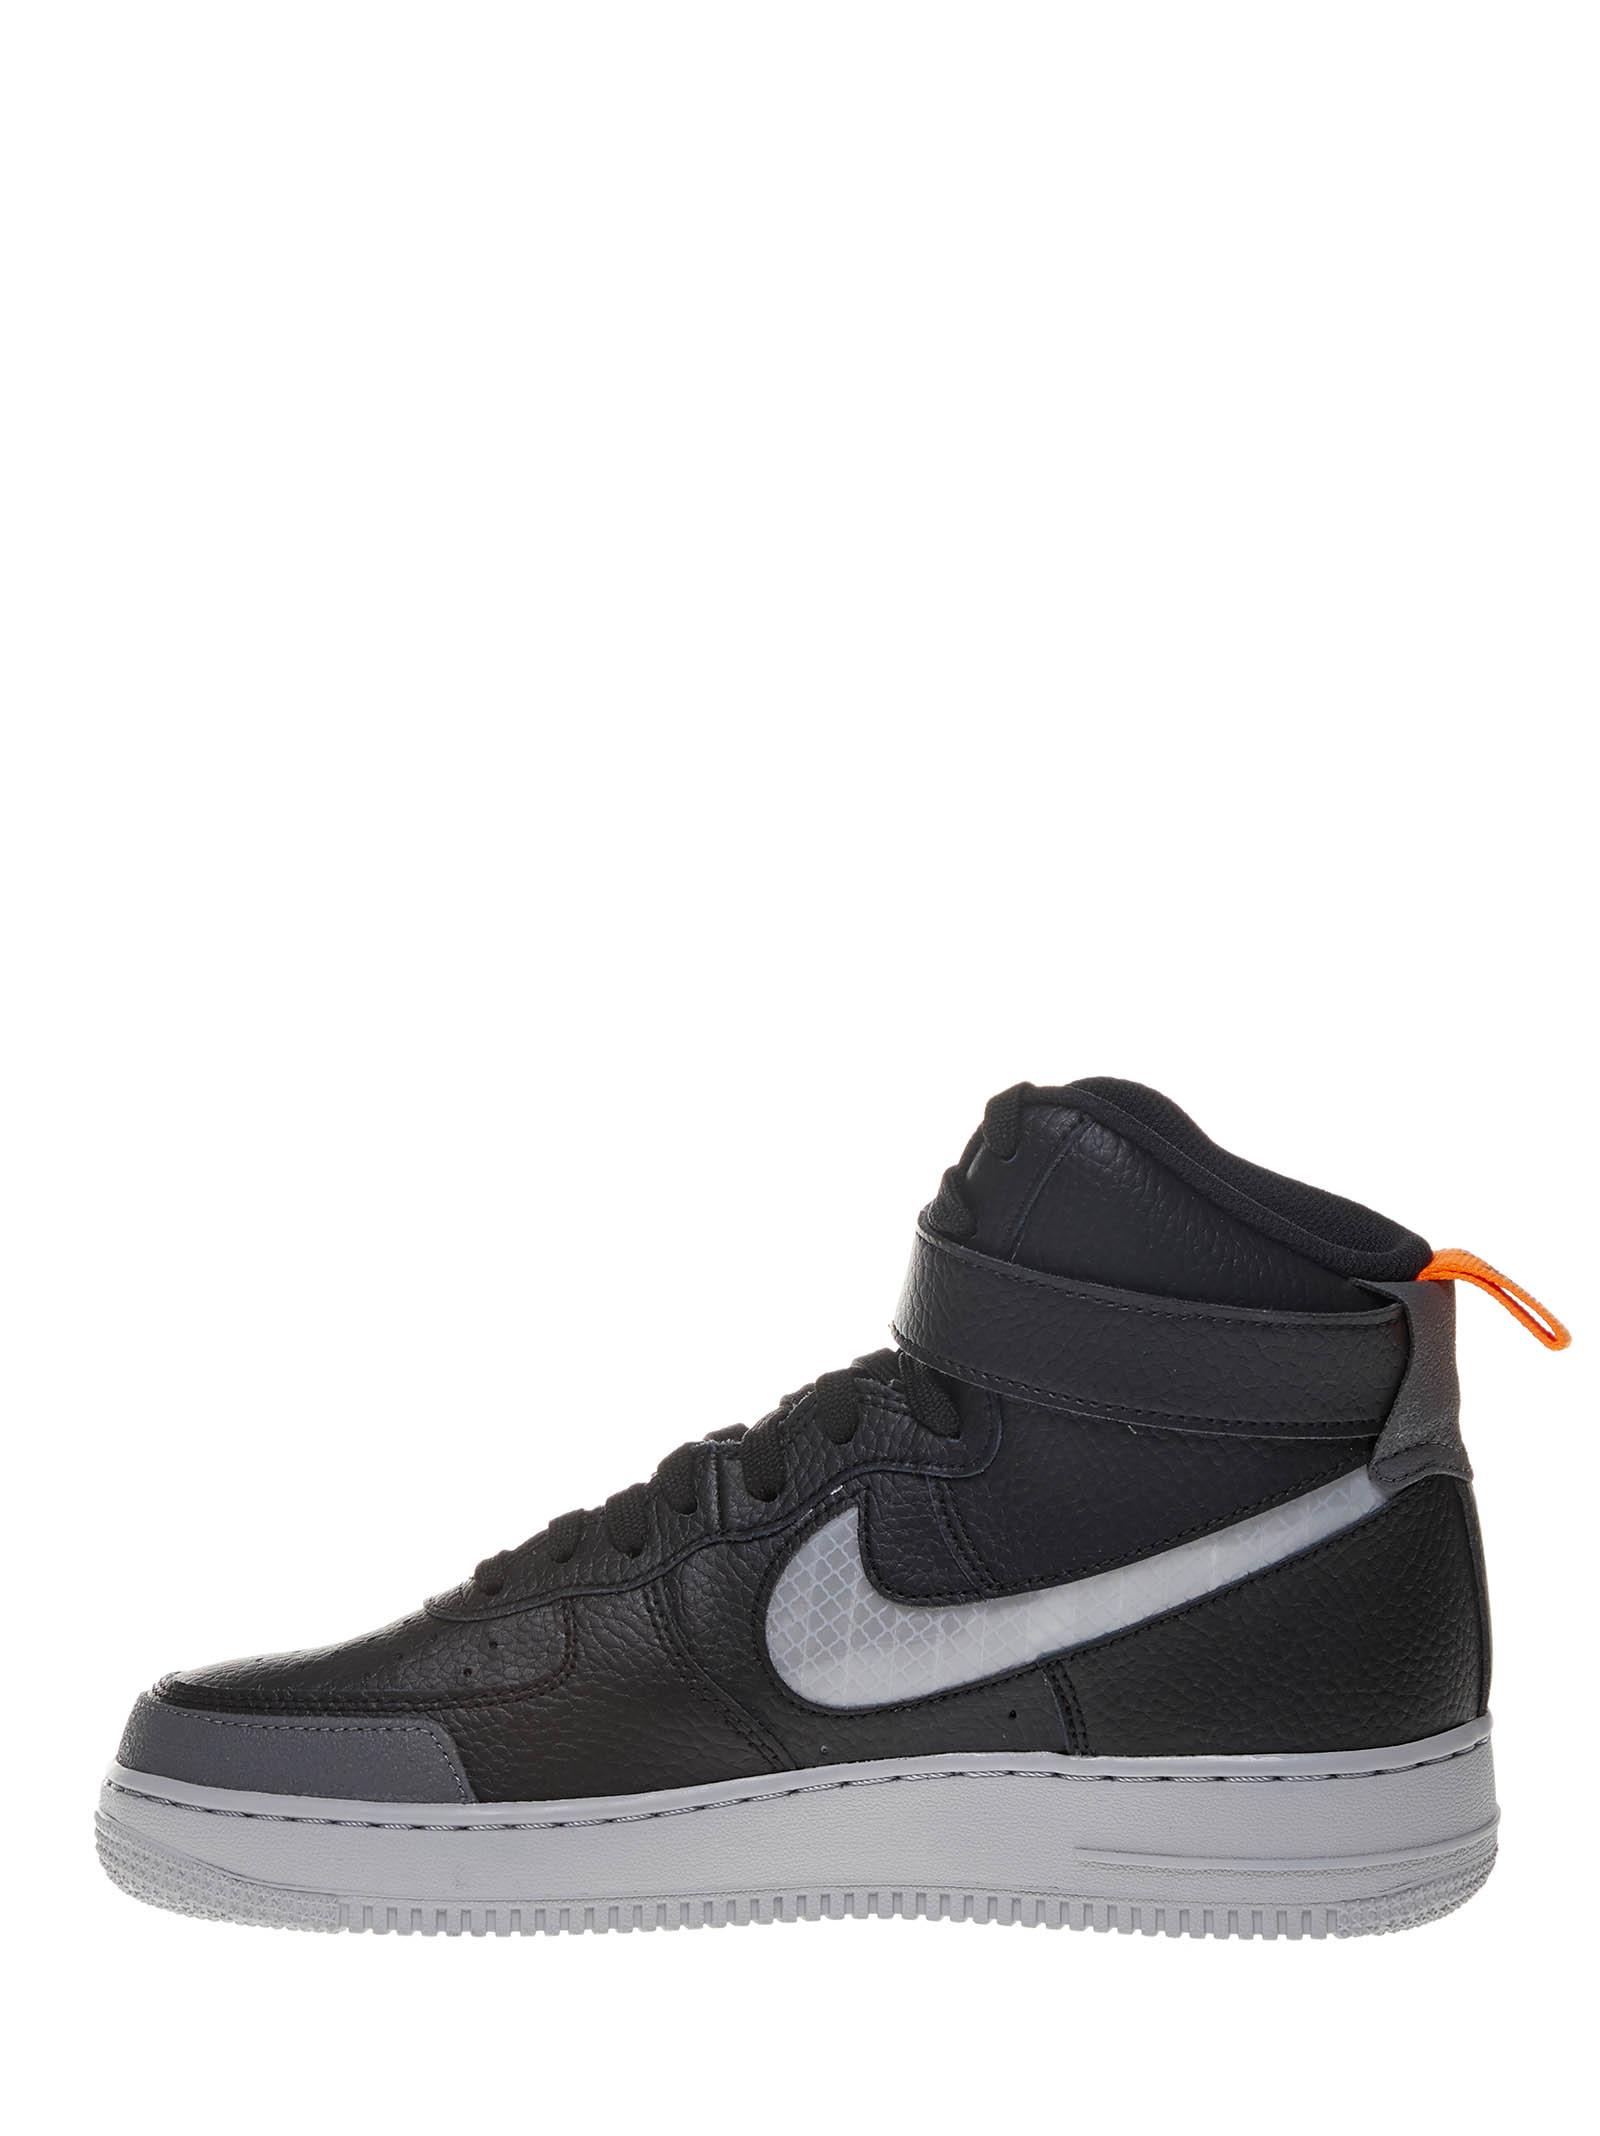 Nike Black Air Force 1 Hight '07 Lv8 Sneakers With Reflective Swoosh And  Grey Details. for Men | Lyst